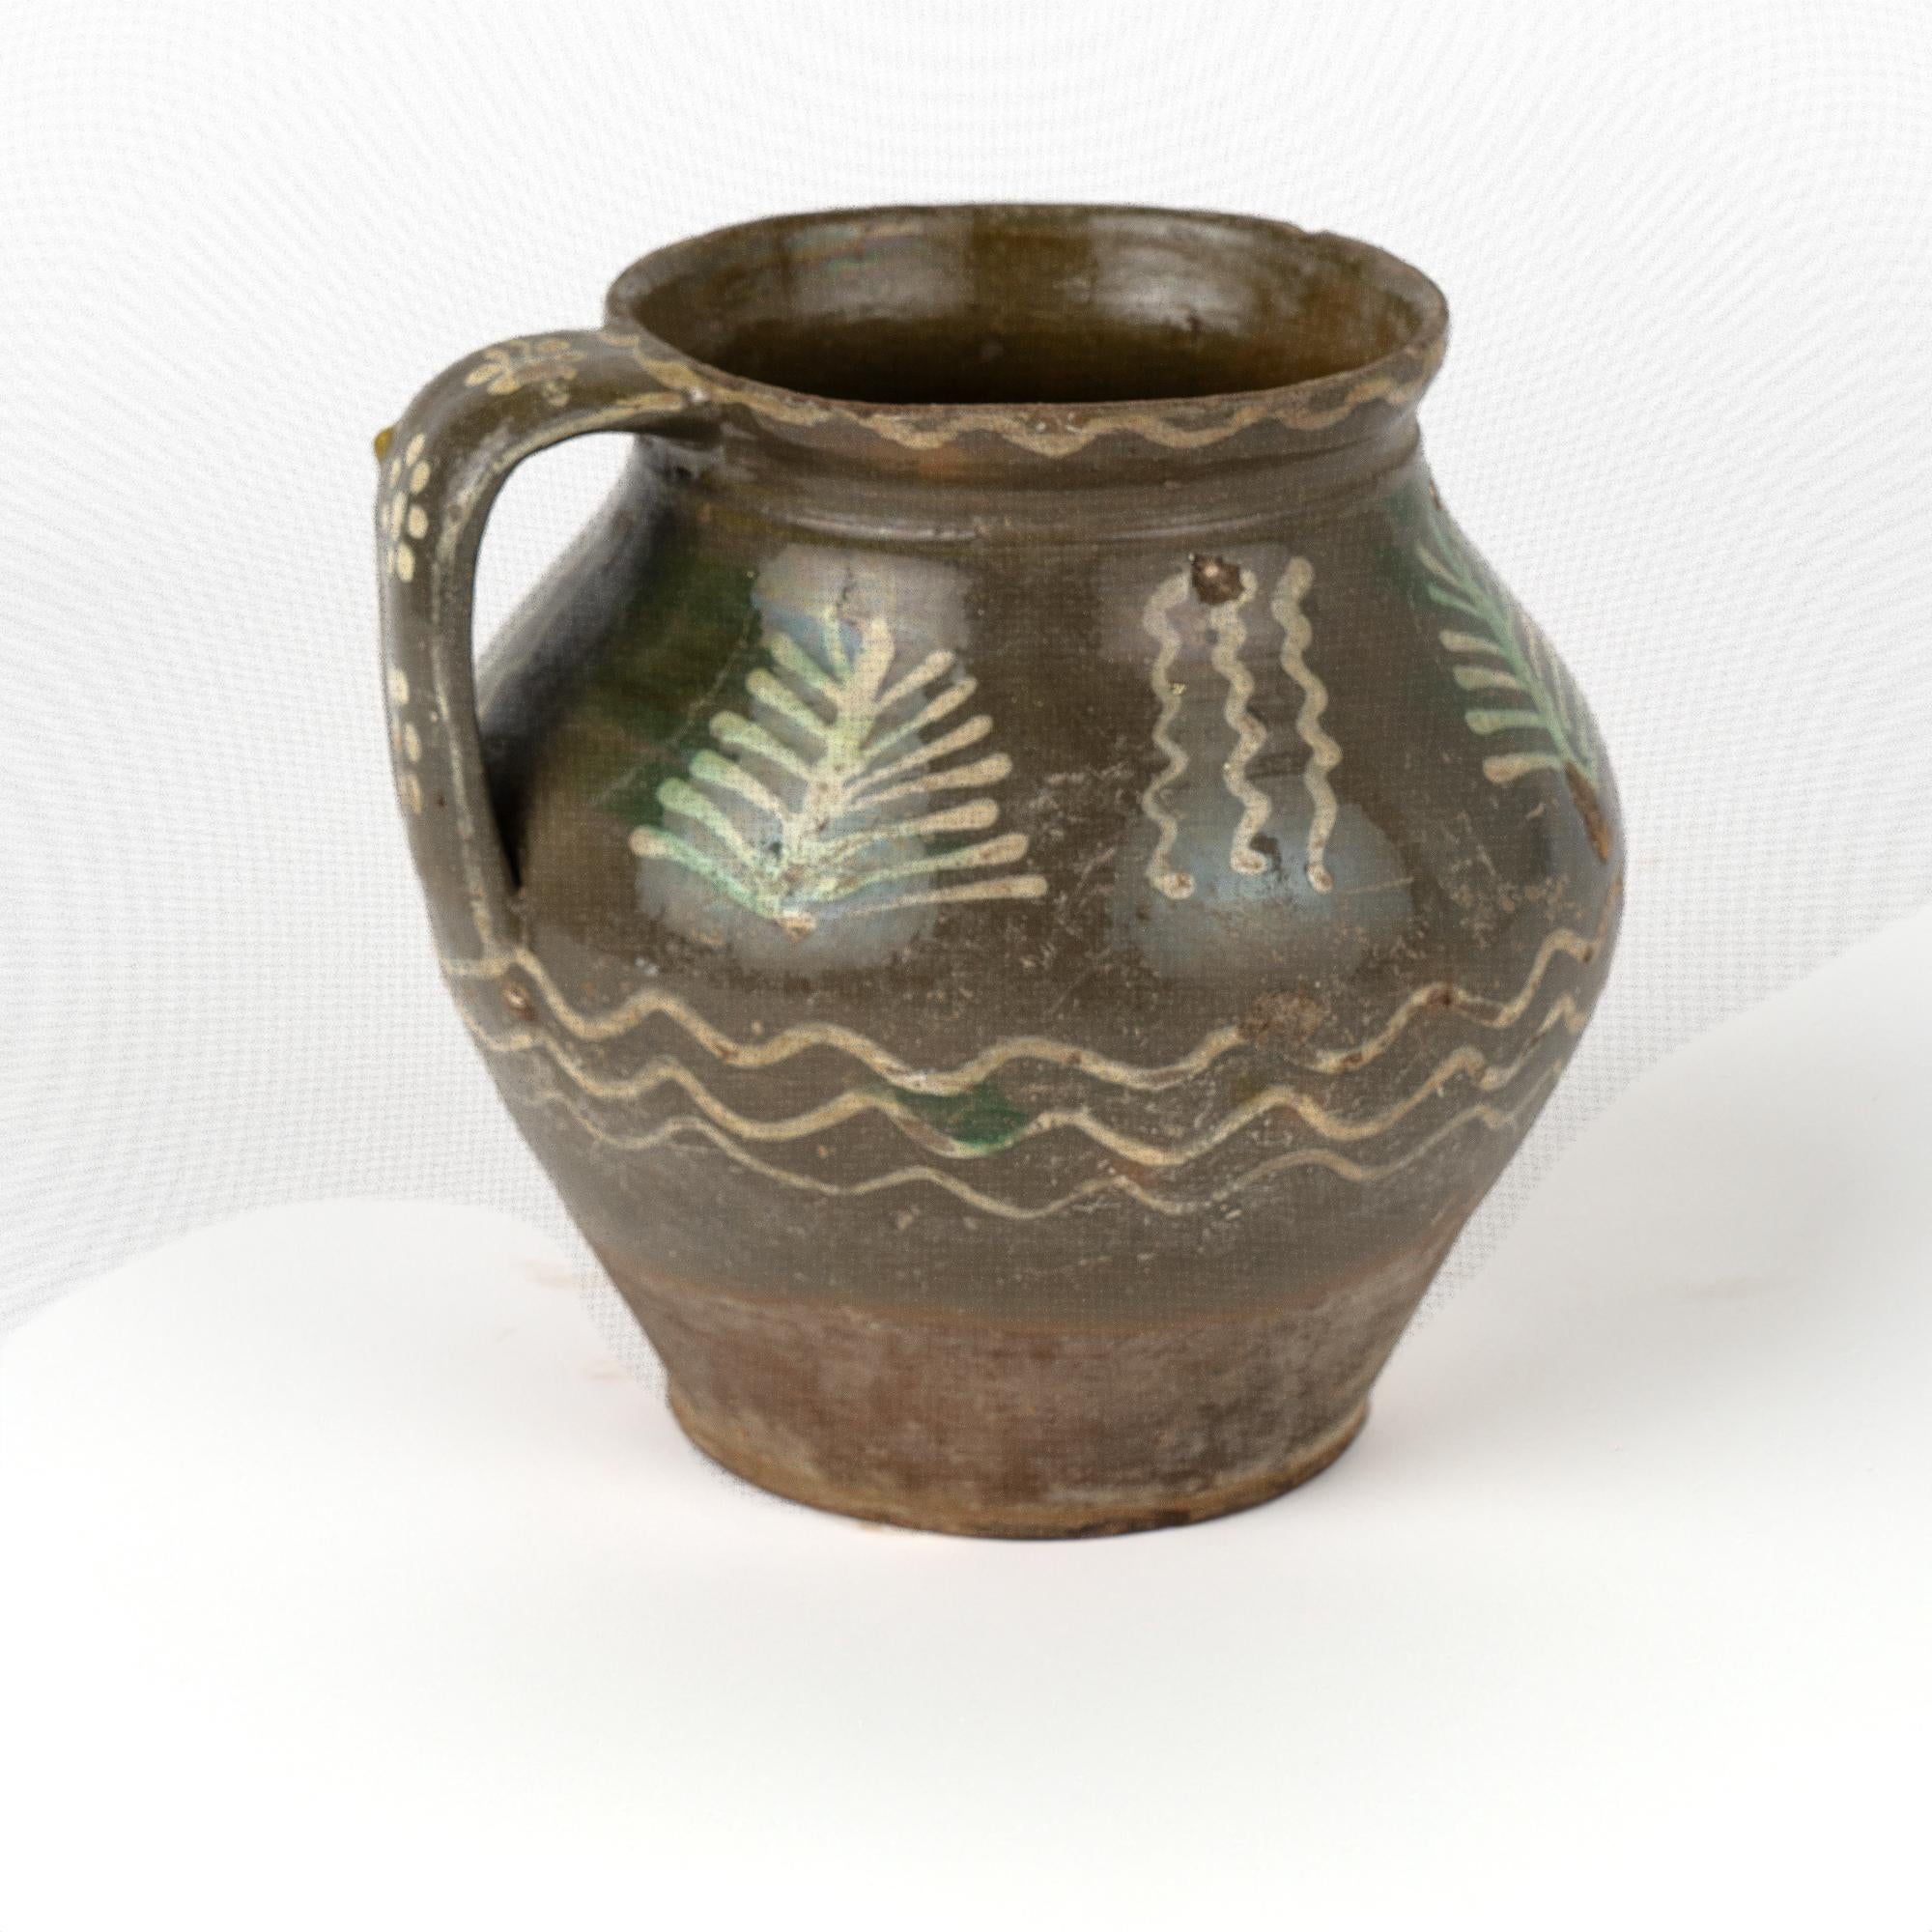 Original hand painted earthenware pottery with handle, olive green background. 
Sold in original vintage used condition. Any chips, cracks, distress to paint or pottery is reflective of age and use. Solid condition.

With over 37 years of experience